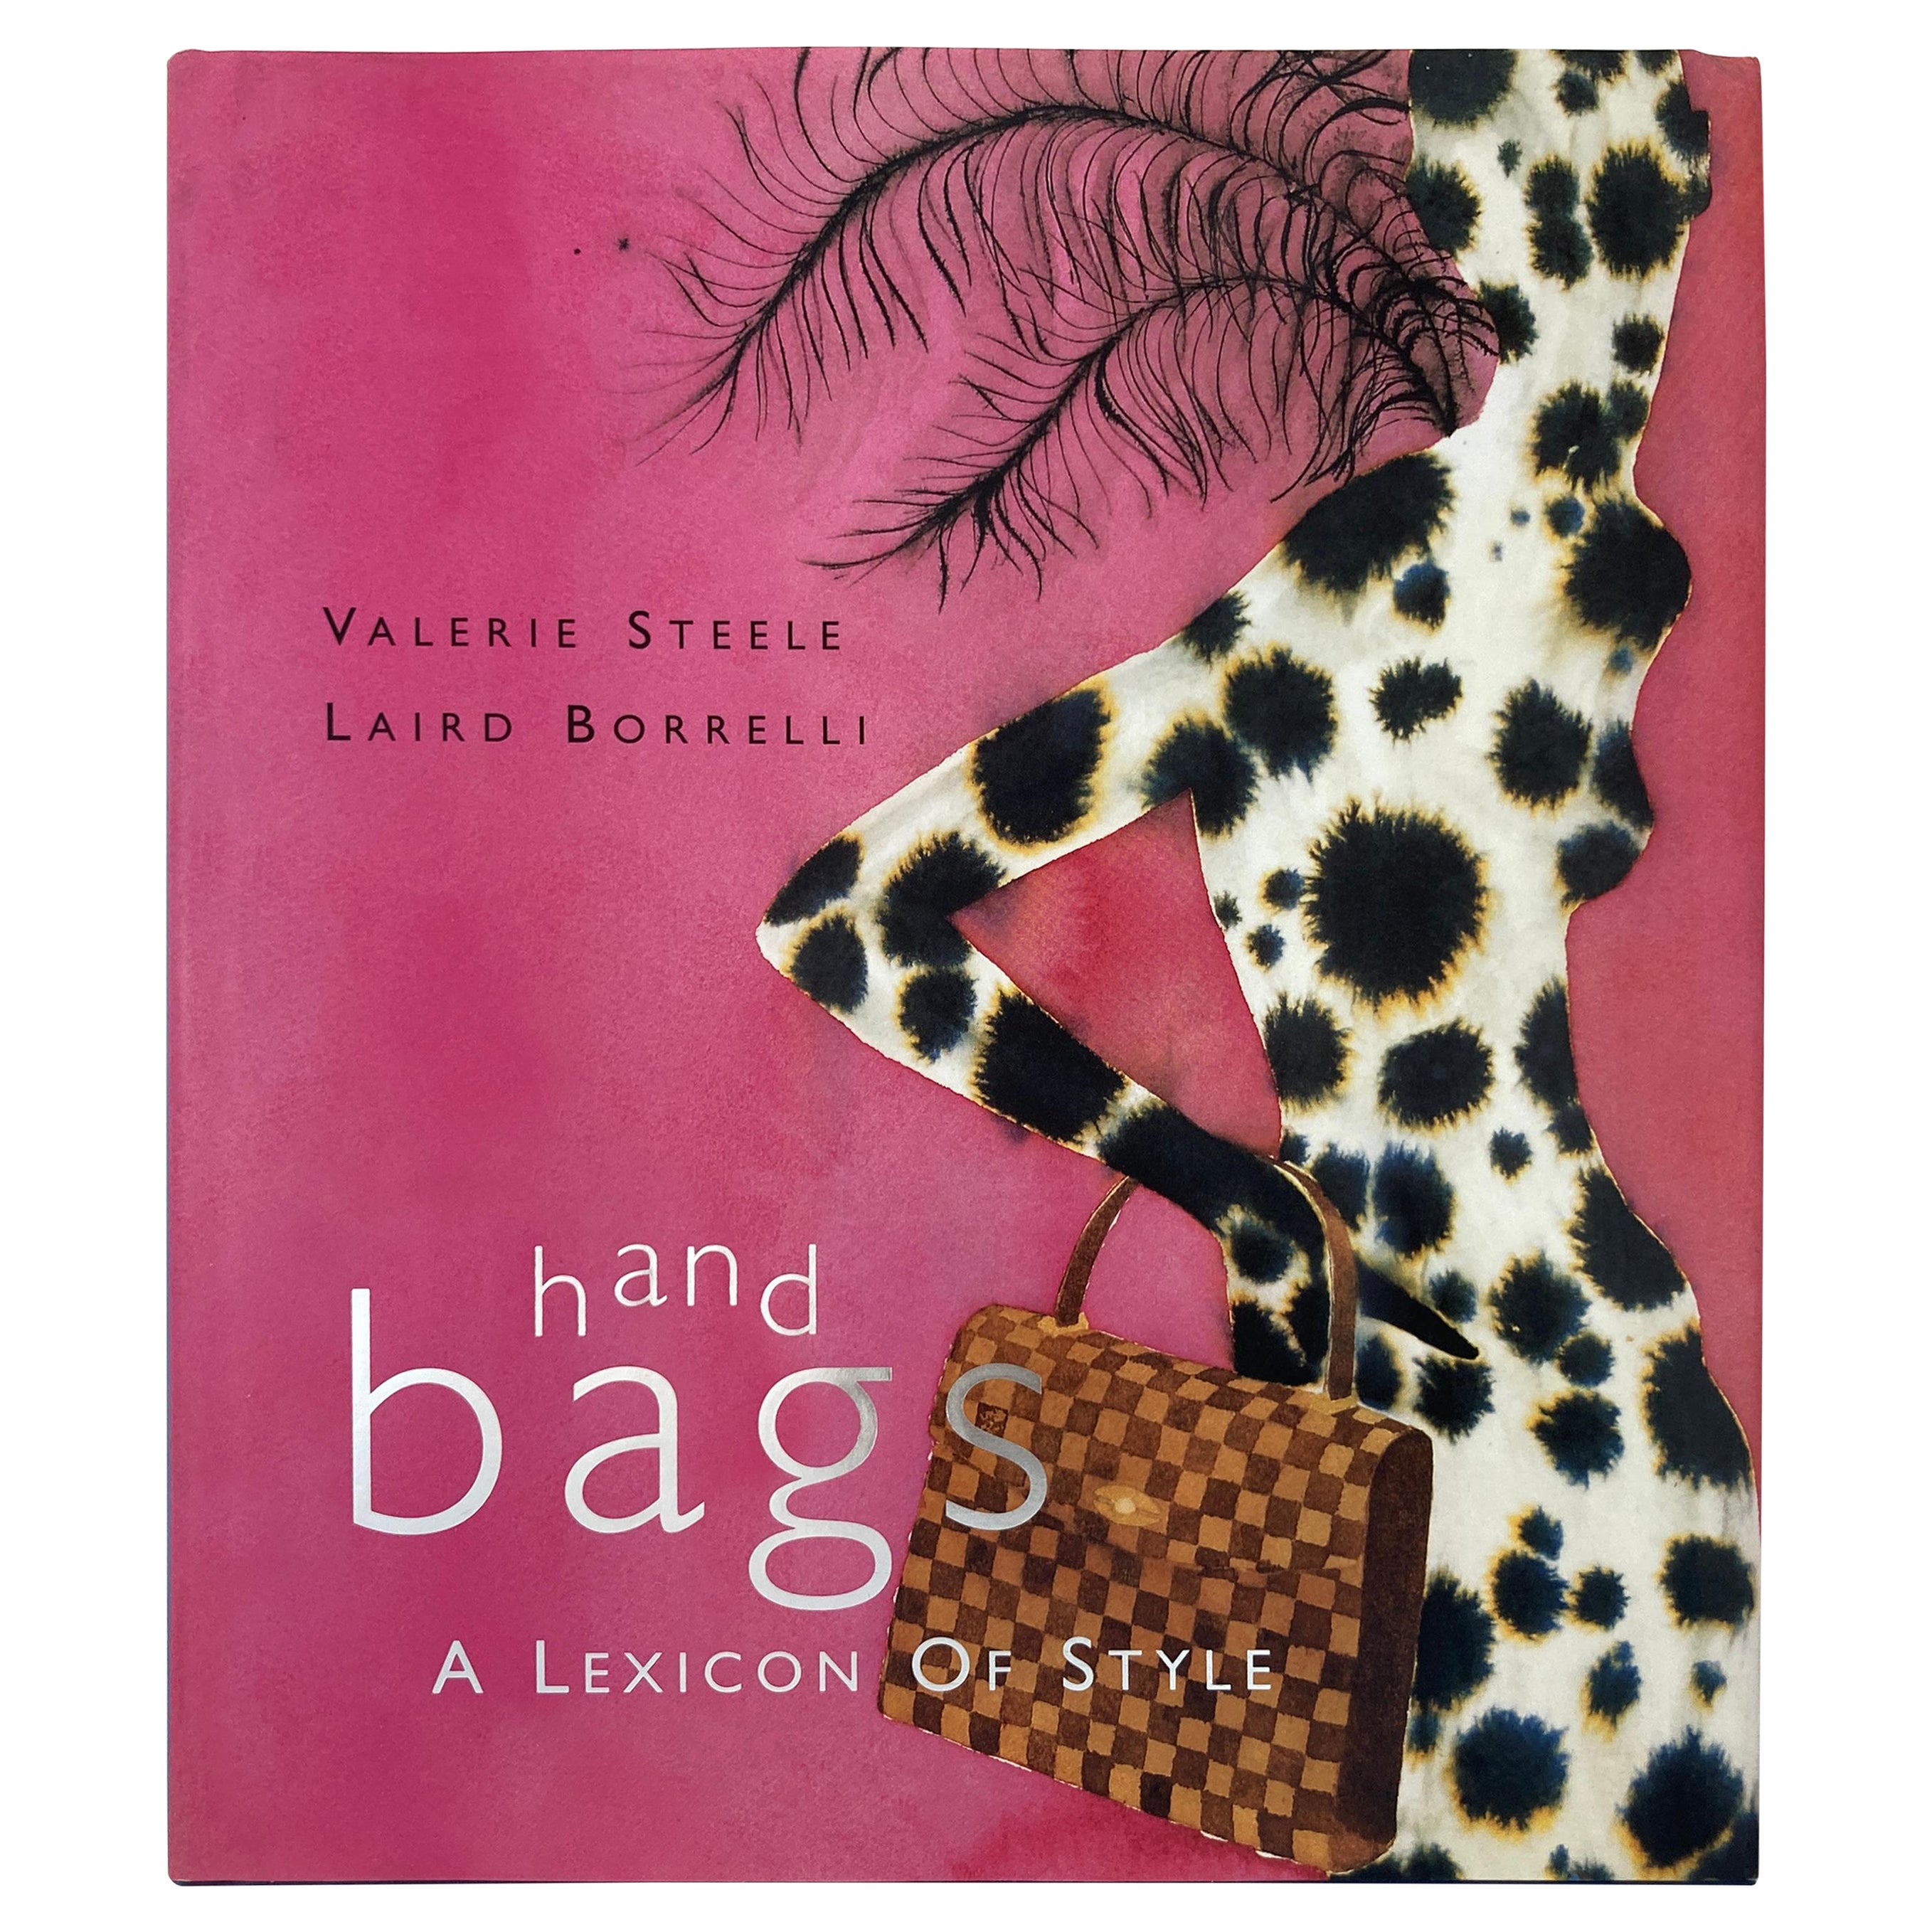 Bags : A Lexicon of Style Valerie Steele, Laird Borrelli Hardcover Book 1st Ed. For Sale